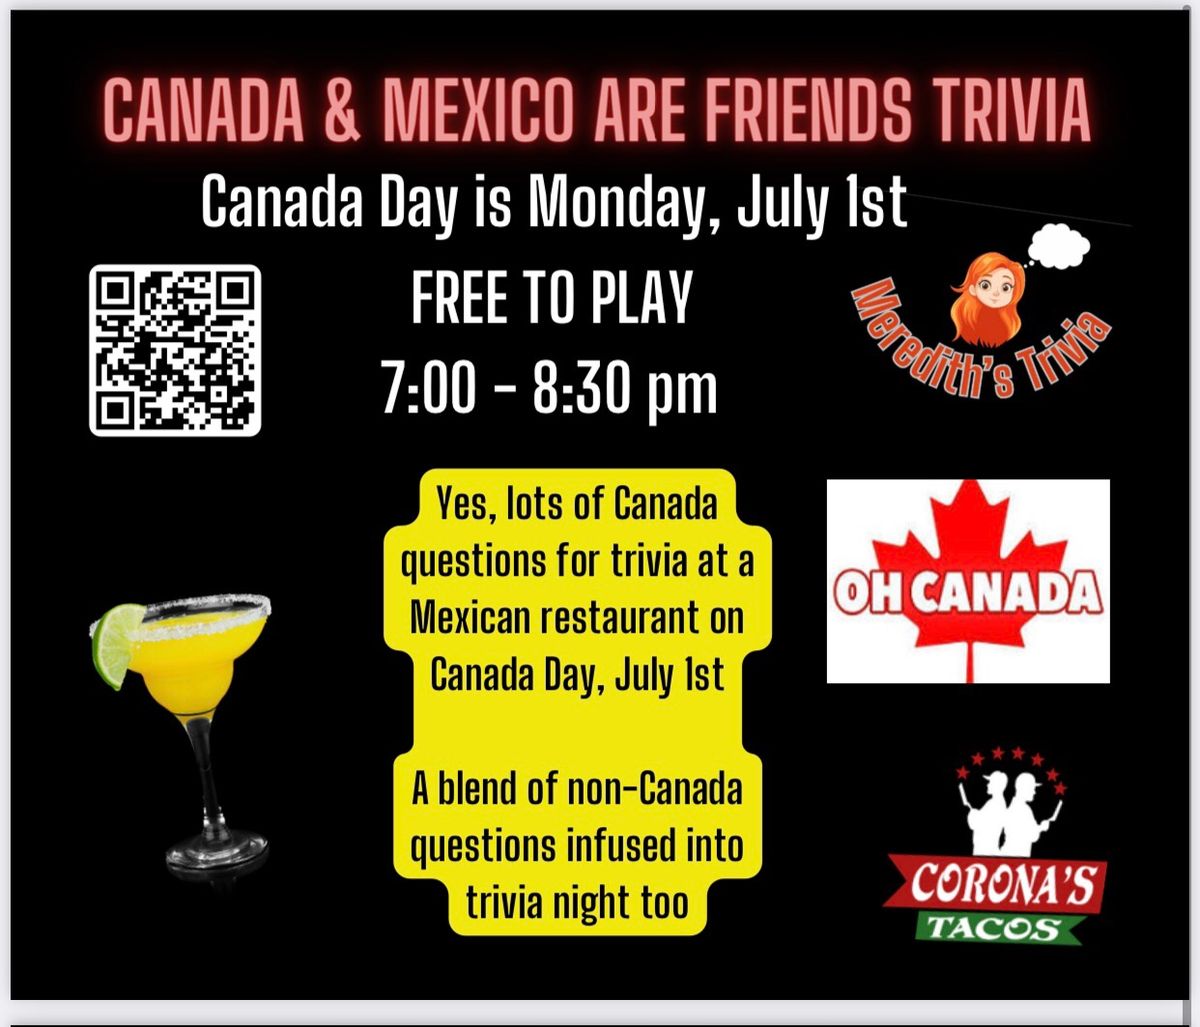 Canada Day Trivia at a Mexican Restaurant